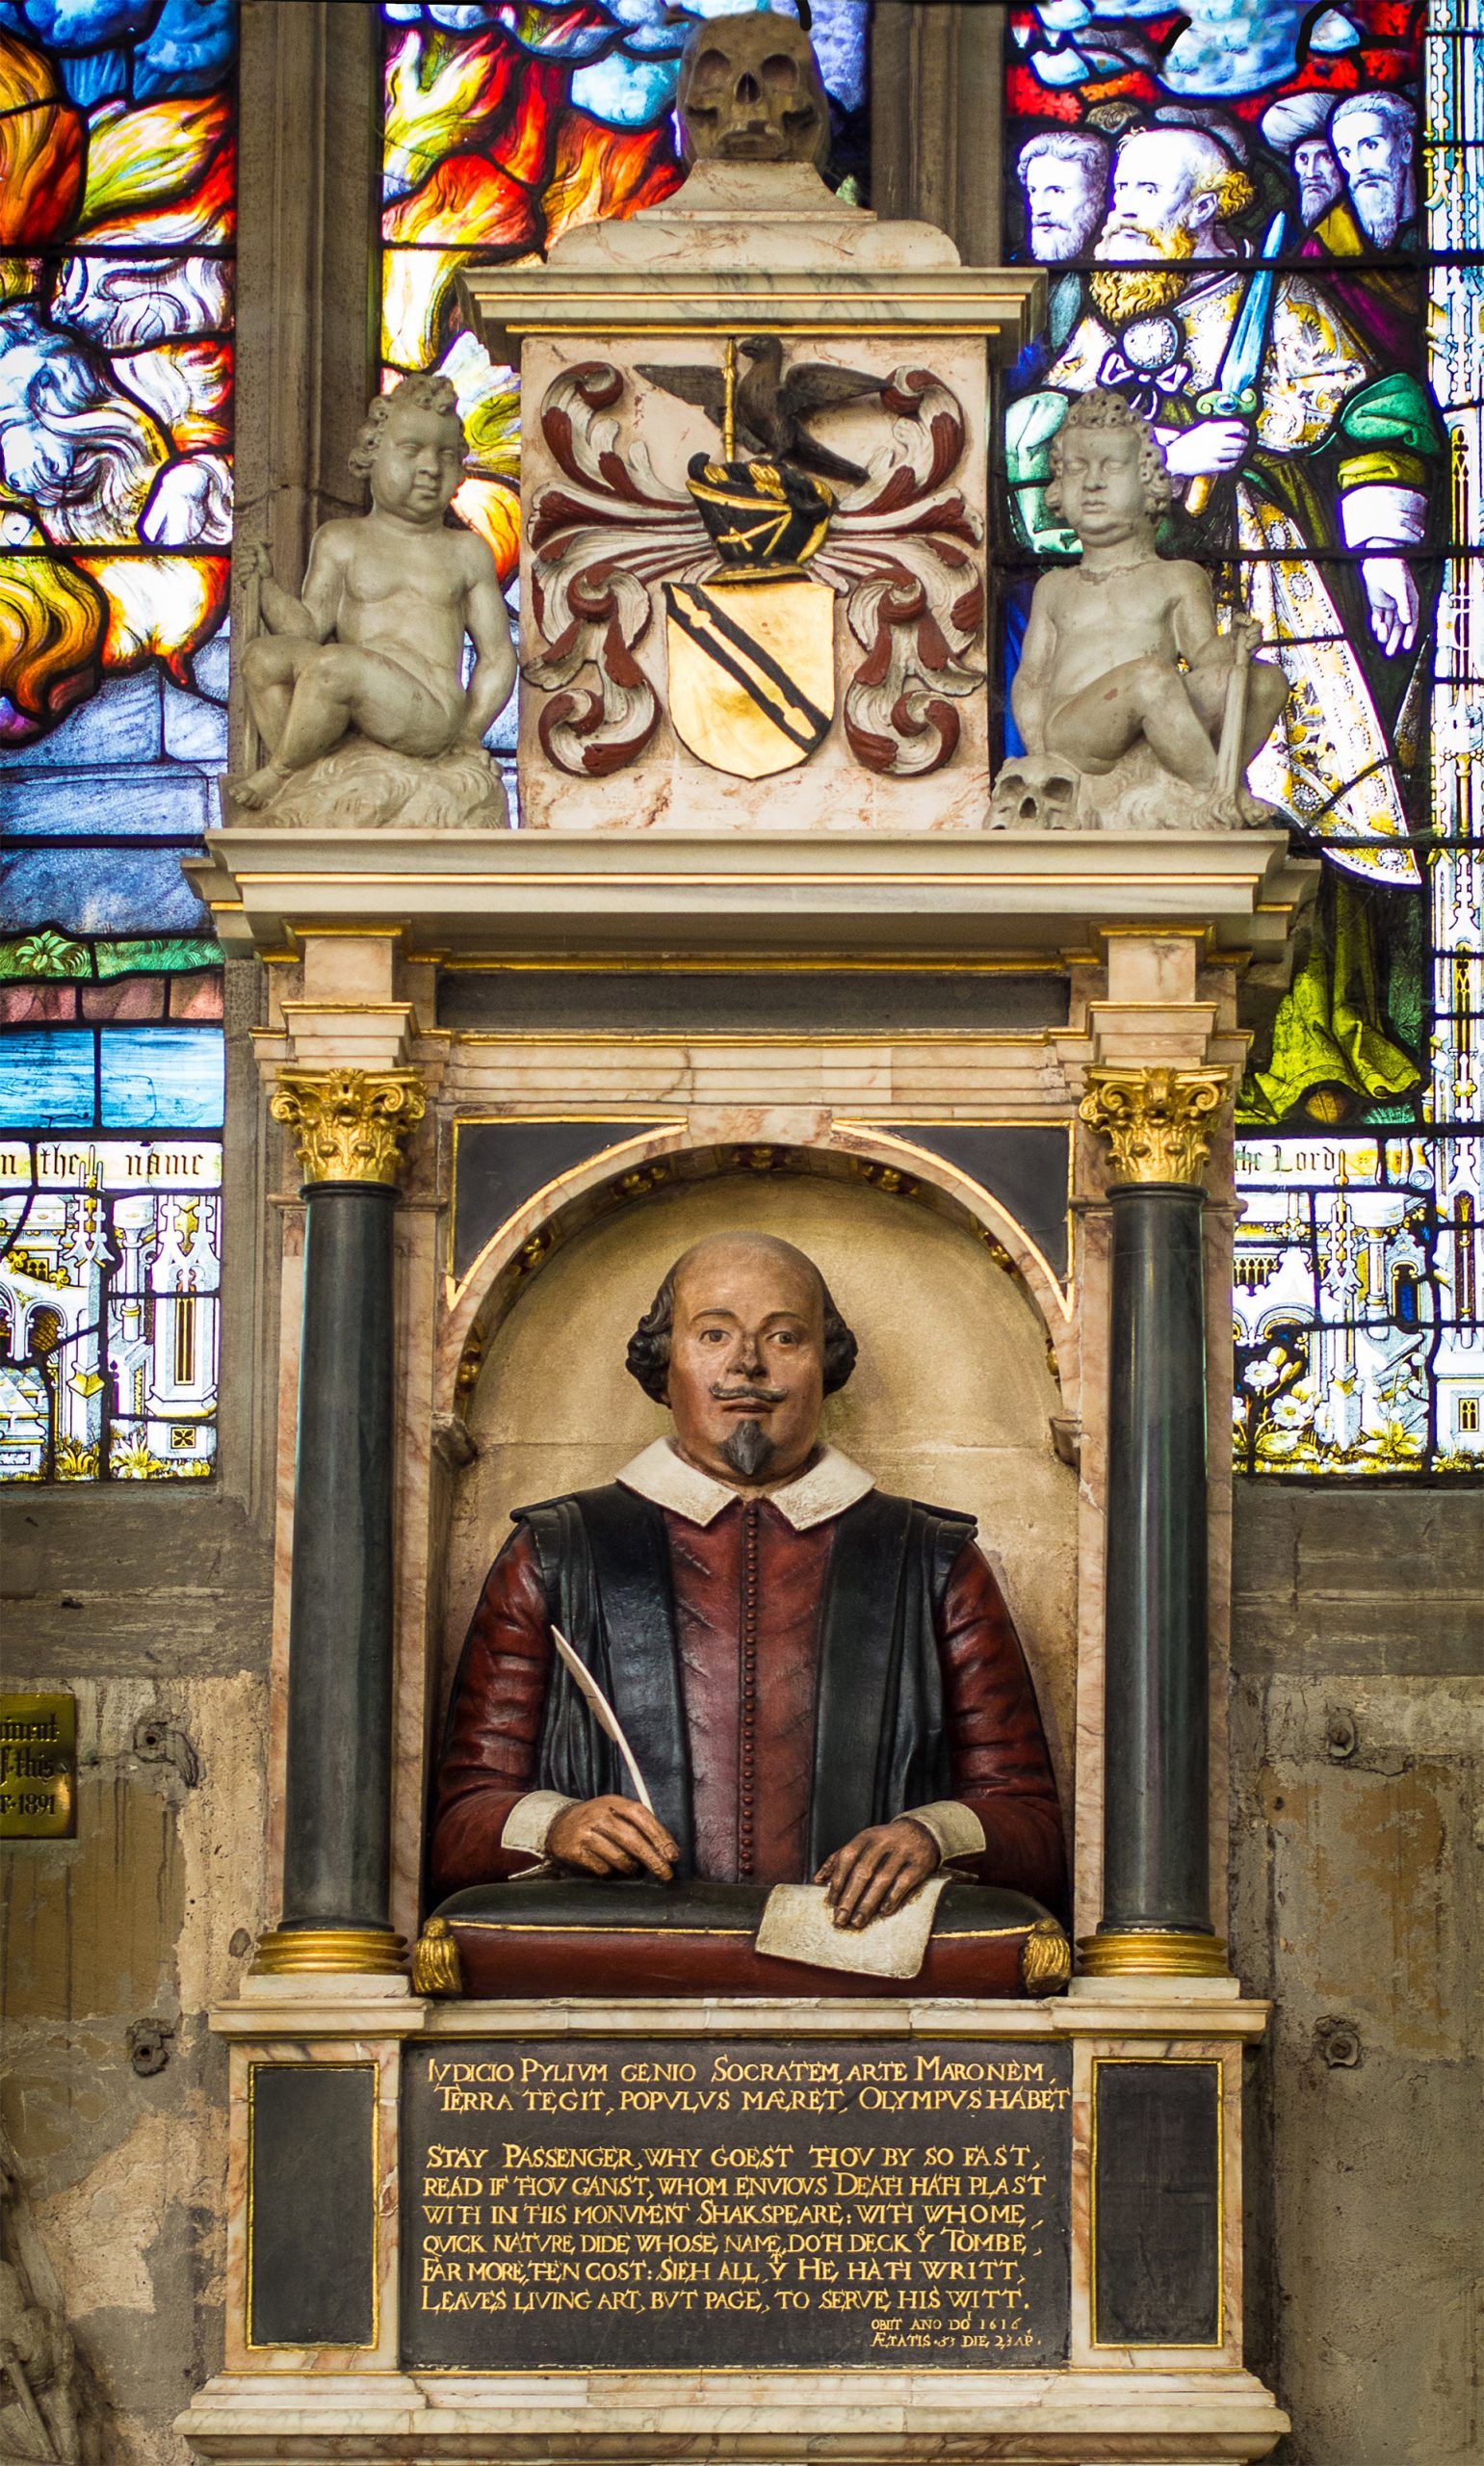 A grand monument inside Holy Trinity Church, Stratford, dedicated to William Shakespeare. The centerpiece is a life-like bust of Shakespeare, showing him holding a quill, with a focused expression. He is dressed in a red vest with a white collar. Above him, there are decorative elements, including a crest with a bird and a shield, flanked by two stone cherubs. Vibrant stained glass windows provide a colorful backdrop, illustrating religious scenes. Below Shakespeare's bust, an inscribed plaque with eloquent words pays homage to the playwright's legacy. The monument's intricate details and stonework highlight its historical and artistic significance.